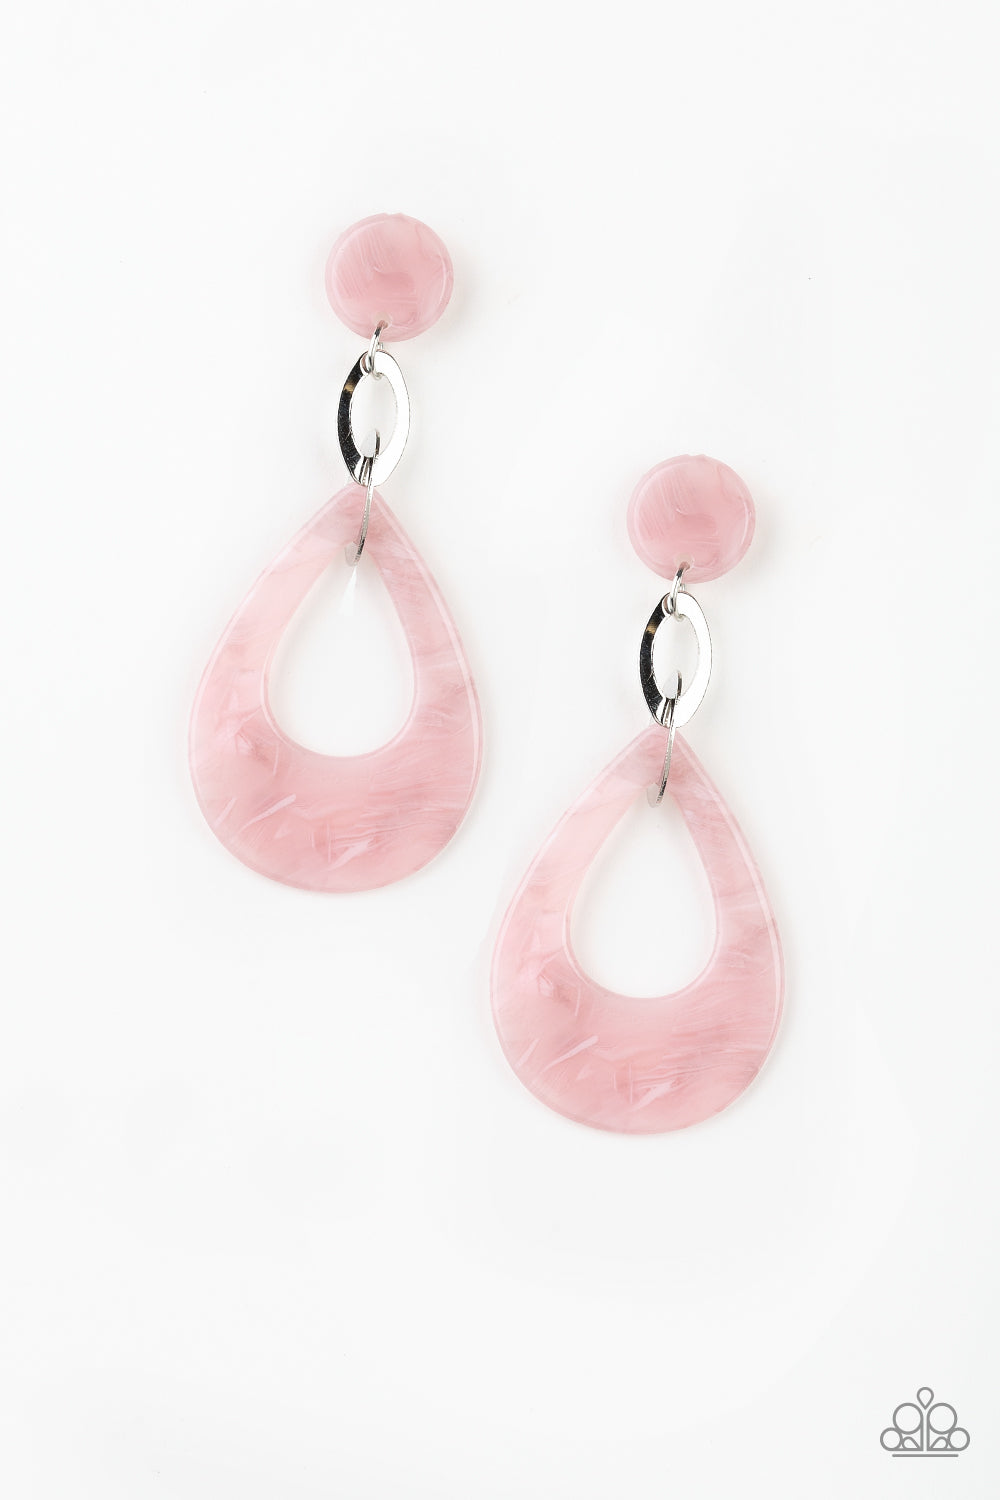 Beach Oasis Pink Paparazzi Earrings Cashmere Pink Jewels - Cashmere Pink Jewels & Accessories, Cashmere Pink Jewels & Accessories - Paparazzi